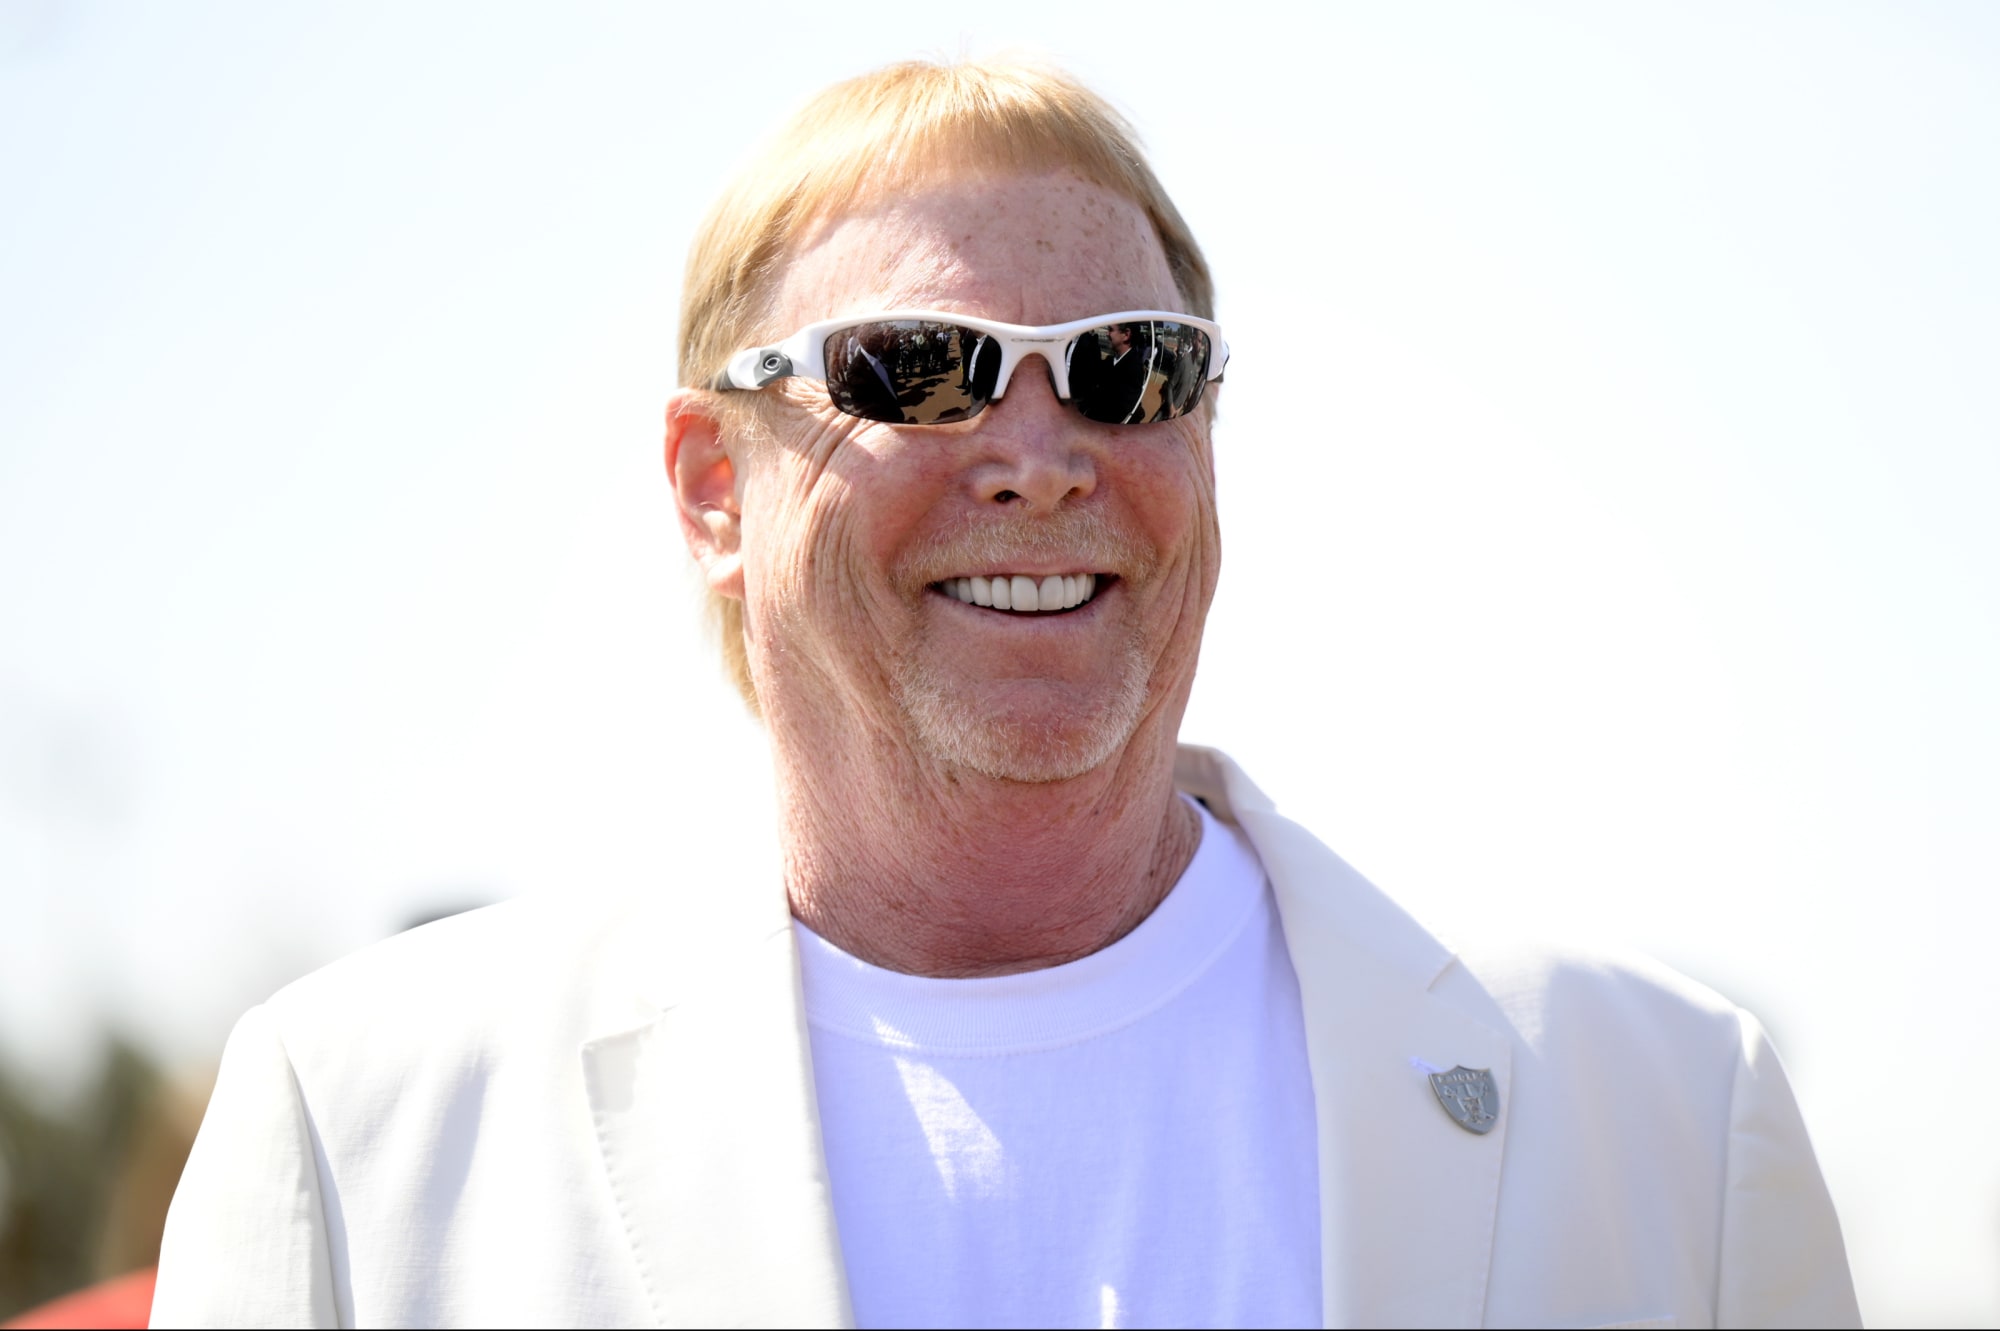 Raiders organization reportedly imploding, per former employees